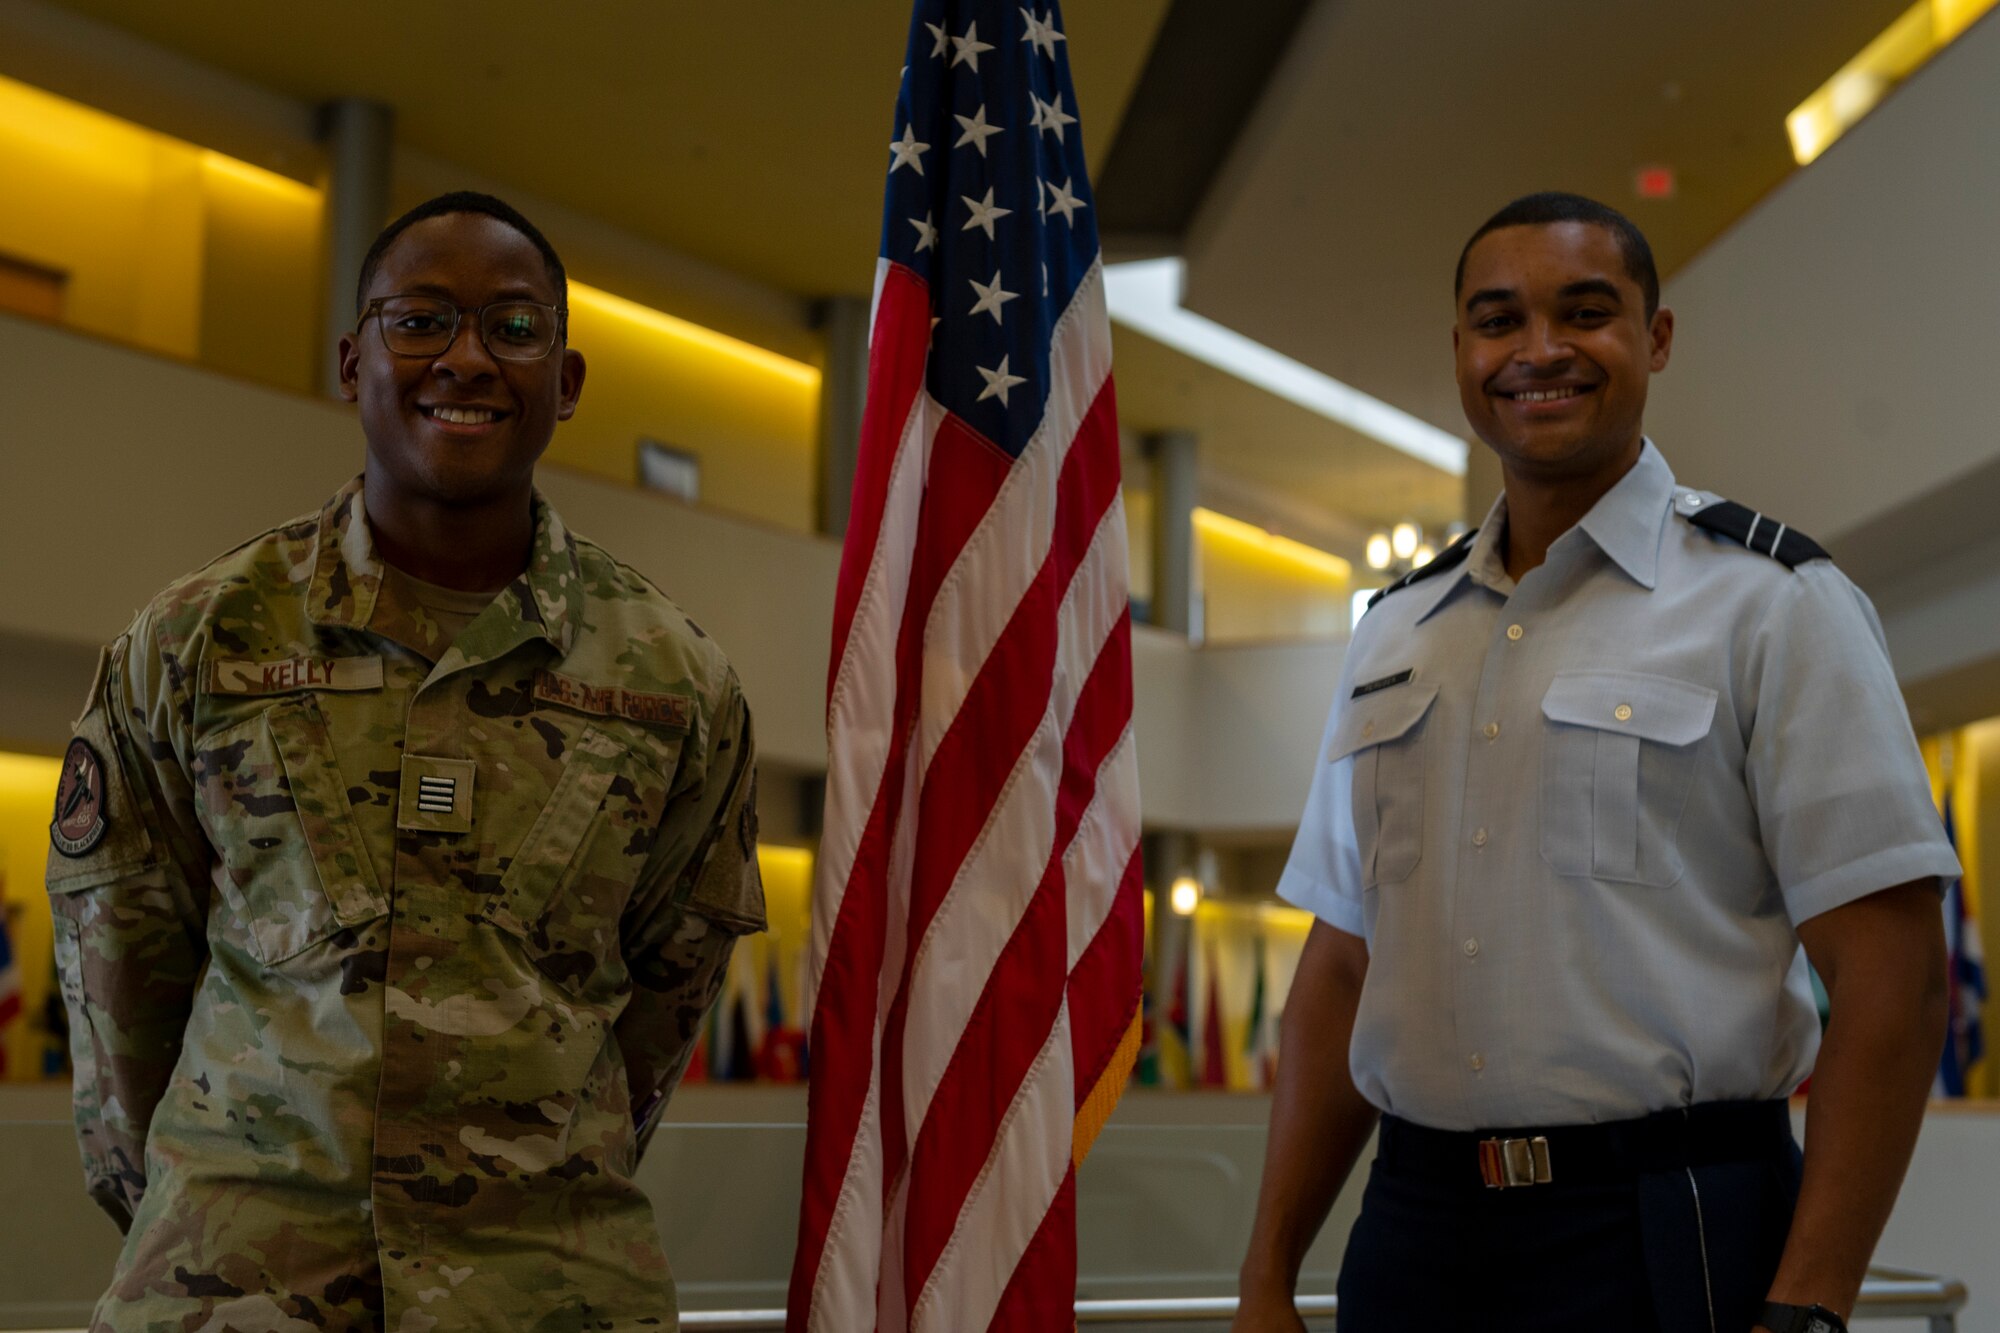 Air Force ROTC Cadet Langston Kelly, left, and ROTC Cadet Hayden Perusek, North Carolina Agricultural and Technical State University detachment 605, pose for a photo at North Carolina Agricultural and Technical State University in Greensboro, North Carolina, Oct. 28, 2021.